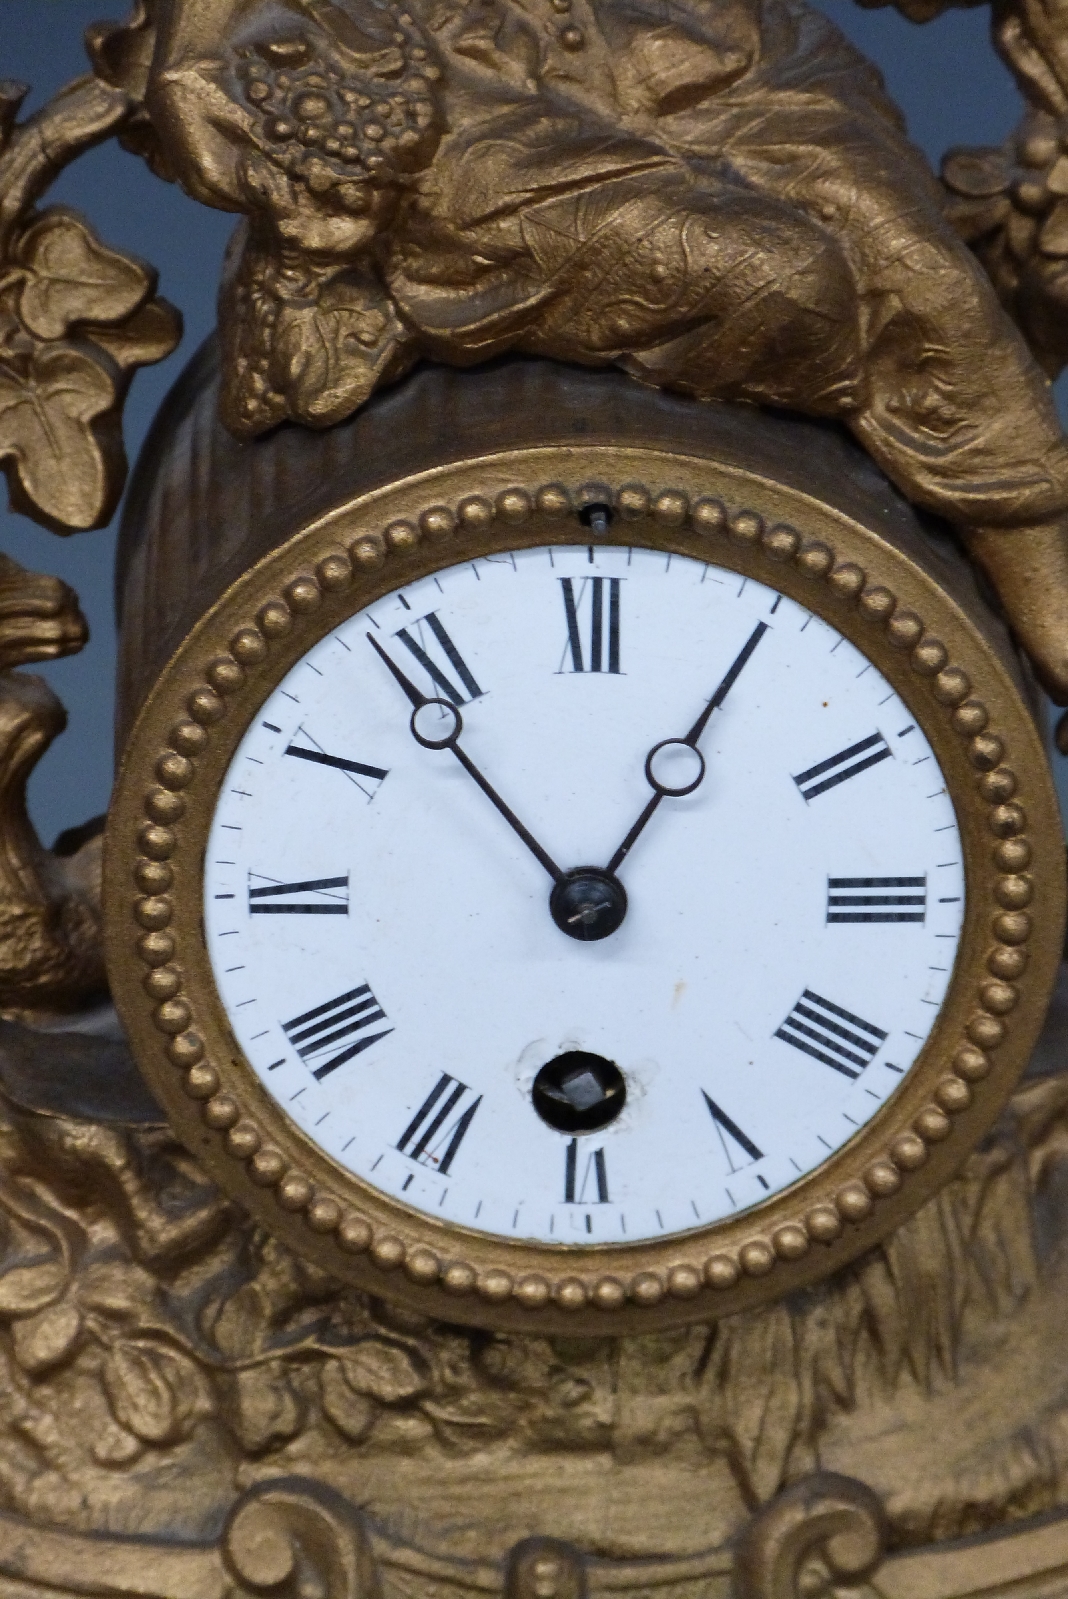 19thC French figural mantel clock, the Roman enamel dial with Breguet hands, the single train - Image 2 of 3